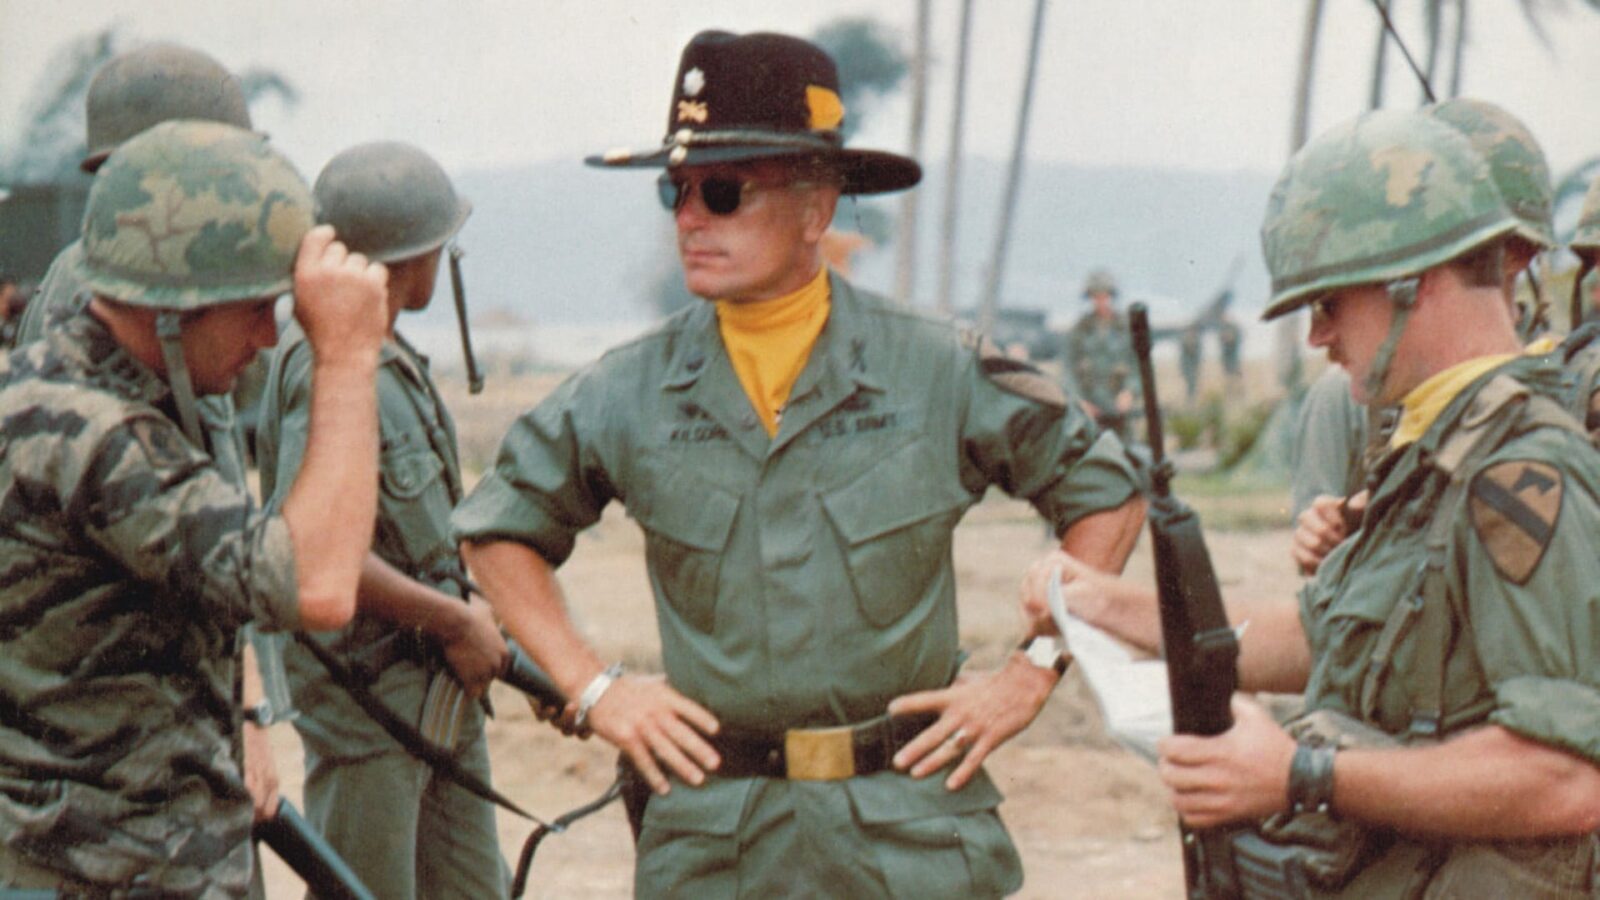 Image from the movie "Apocalypse Now"